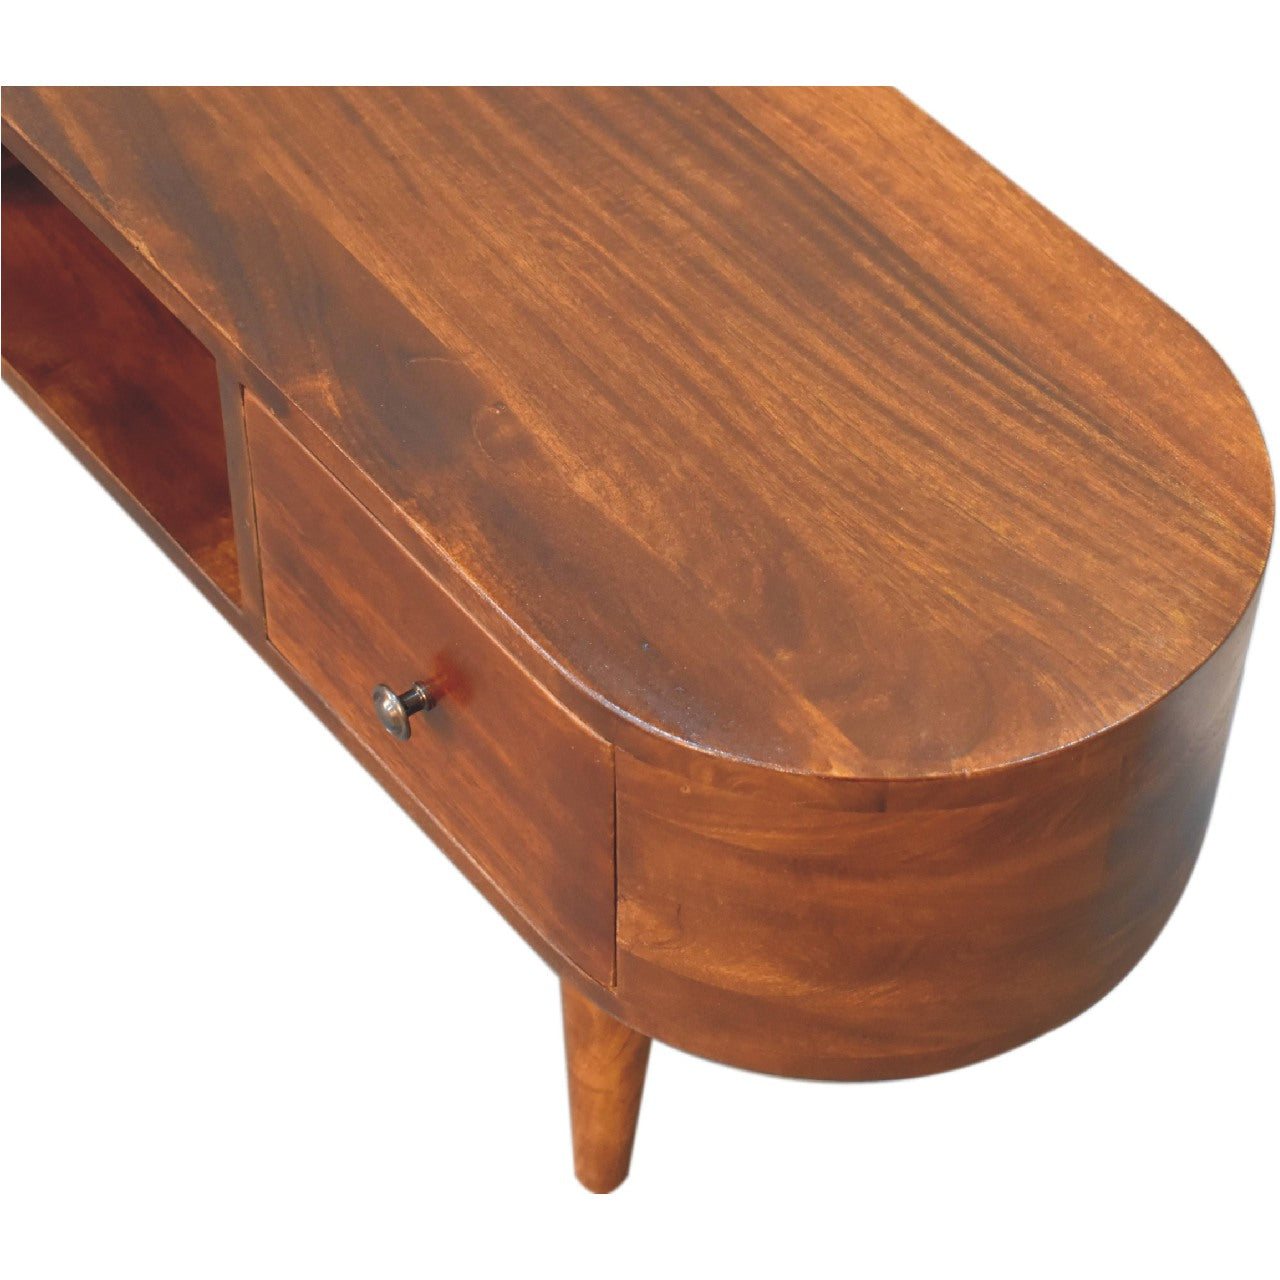 Chestnut Rounded Media Unit with Open Slot